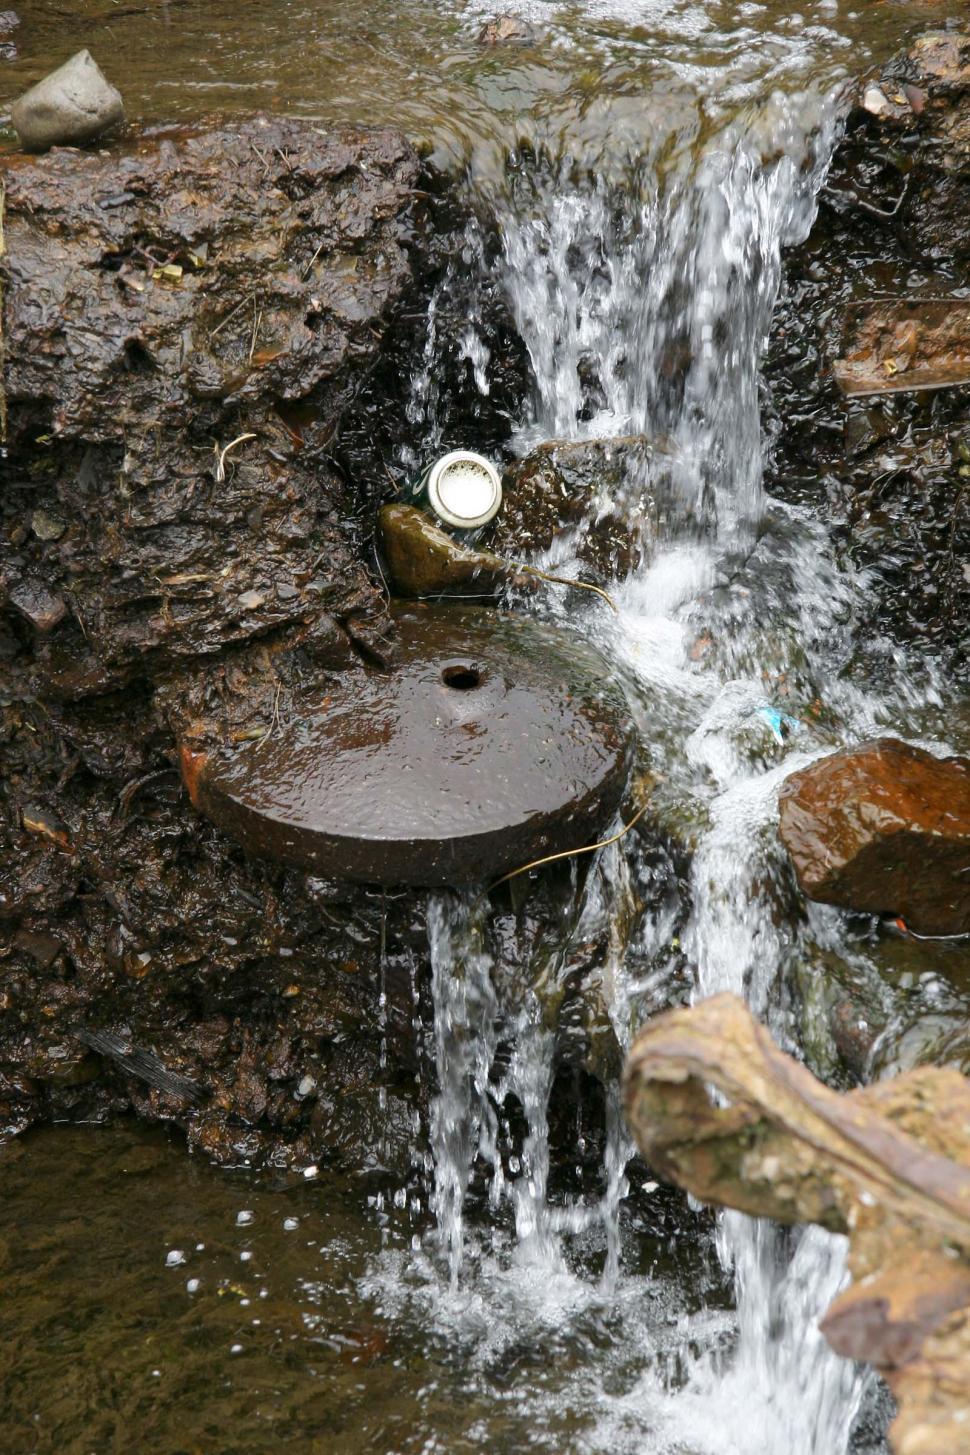 Free Image of Bucket in Waterfall 